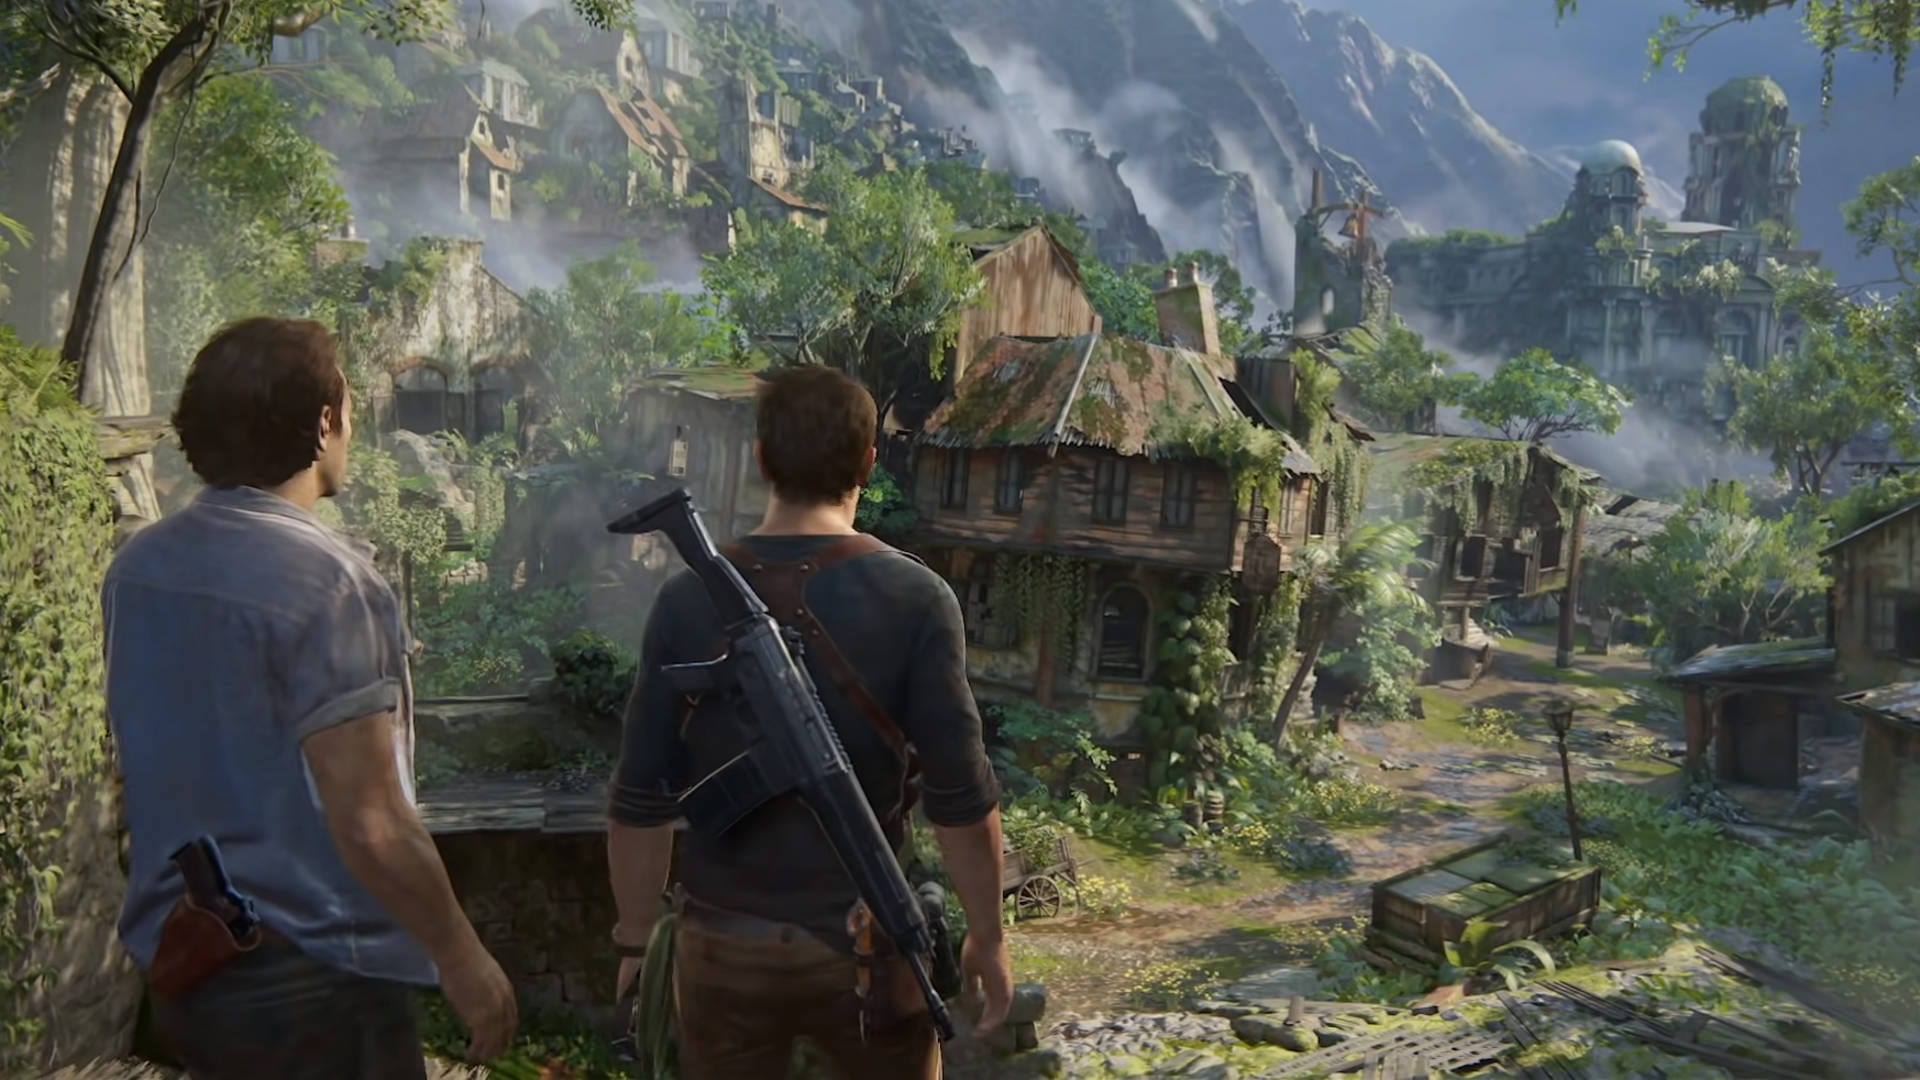 Can you play Uncharted 4: A Thief's End on cloud gaming services?